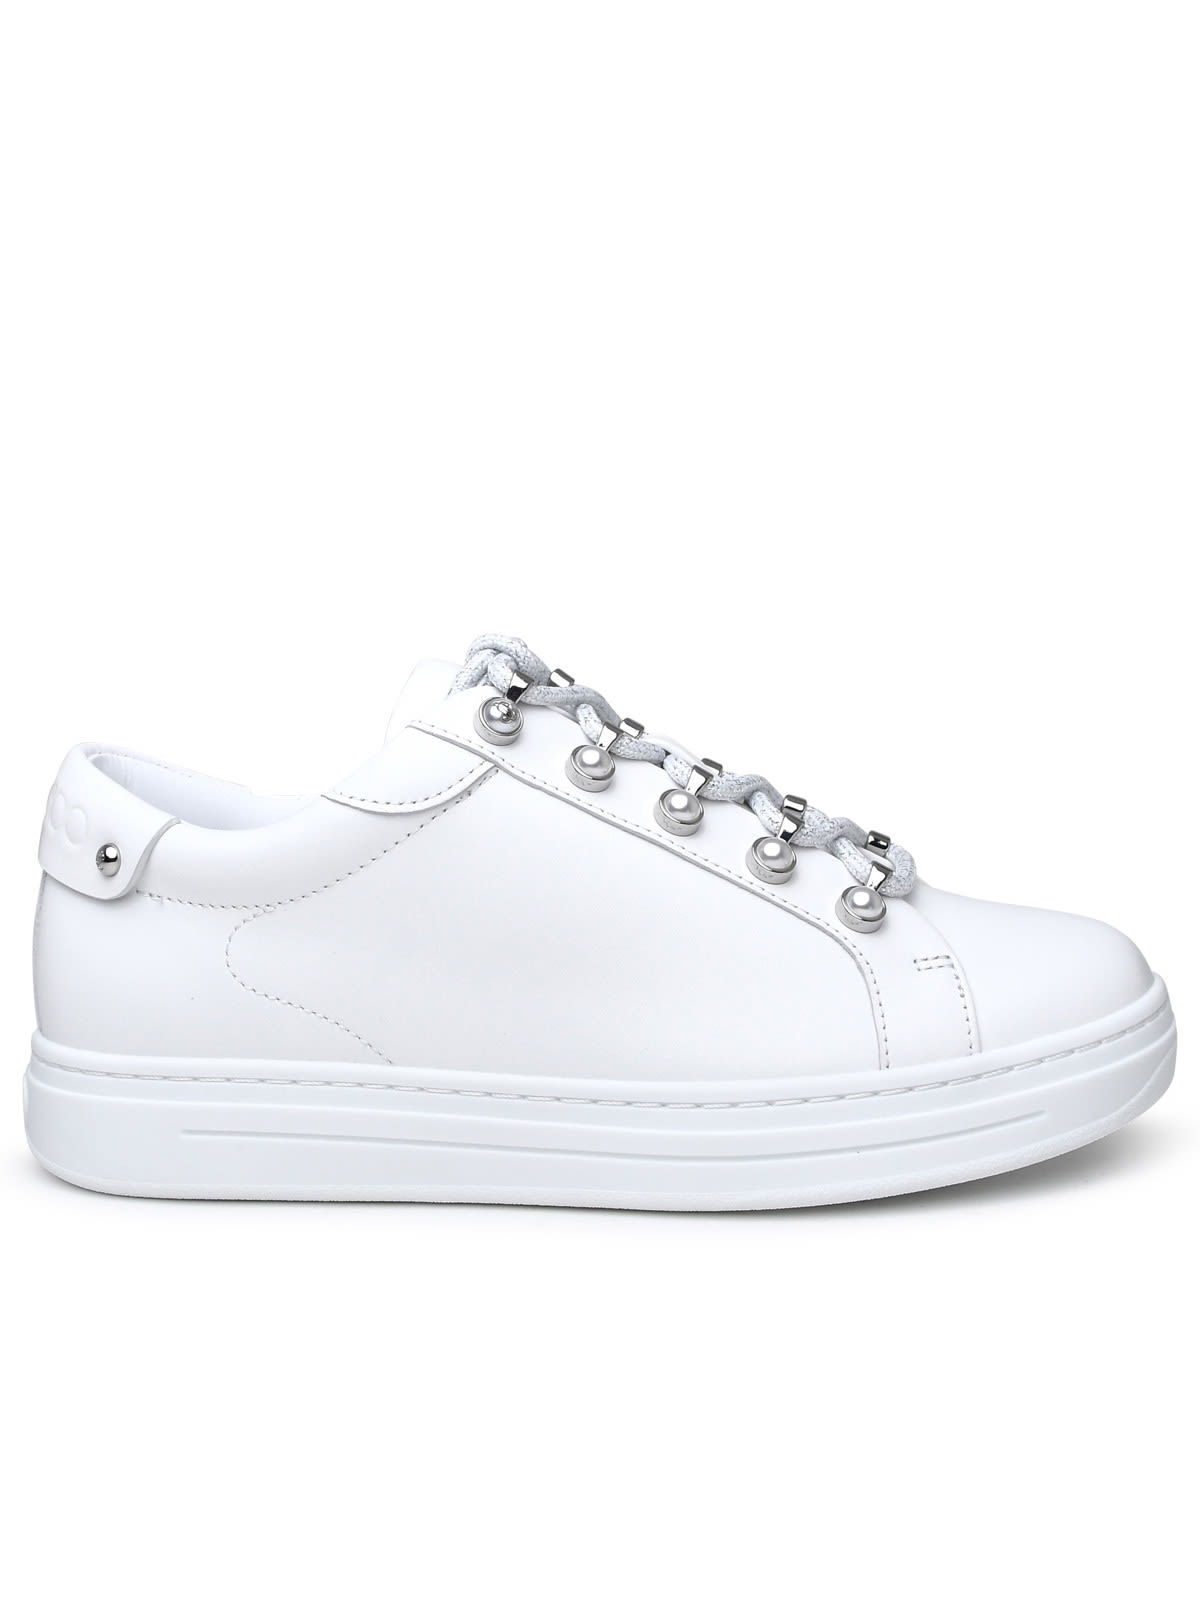 JIMMY CHOO ANTIBES WHITE LEATHER trainers